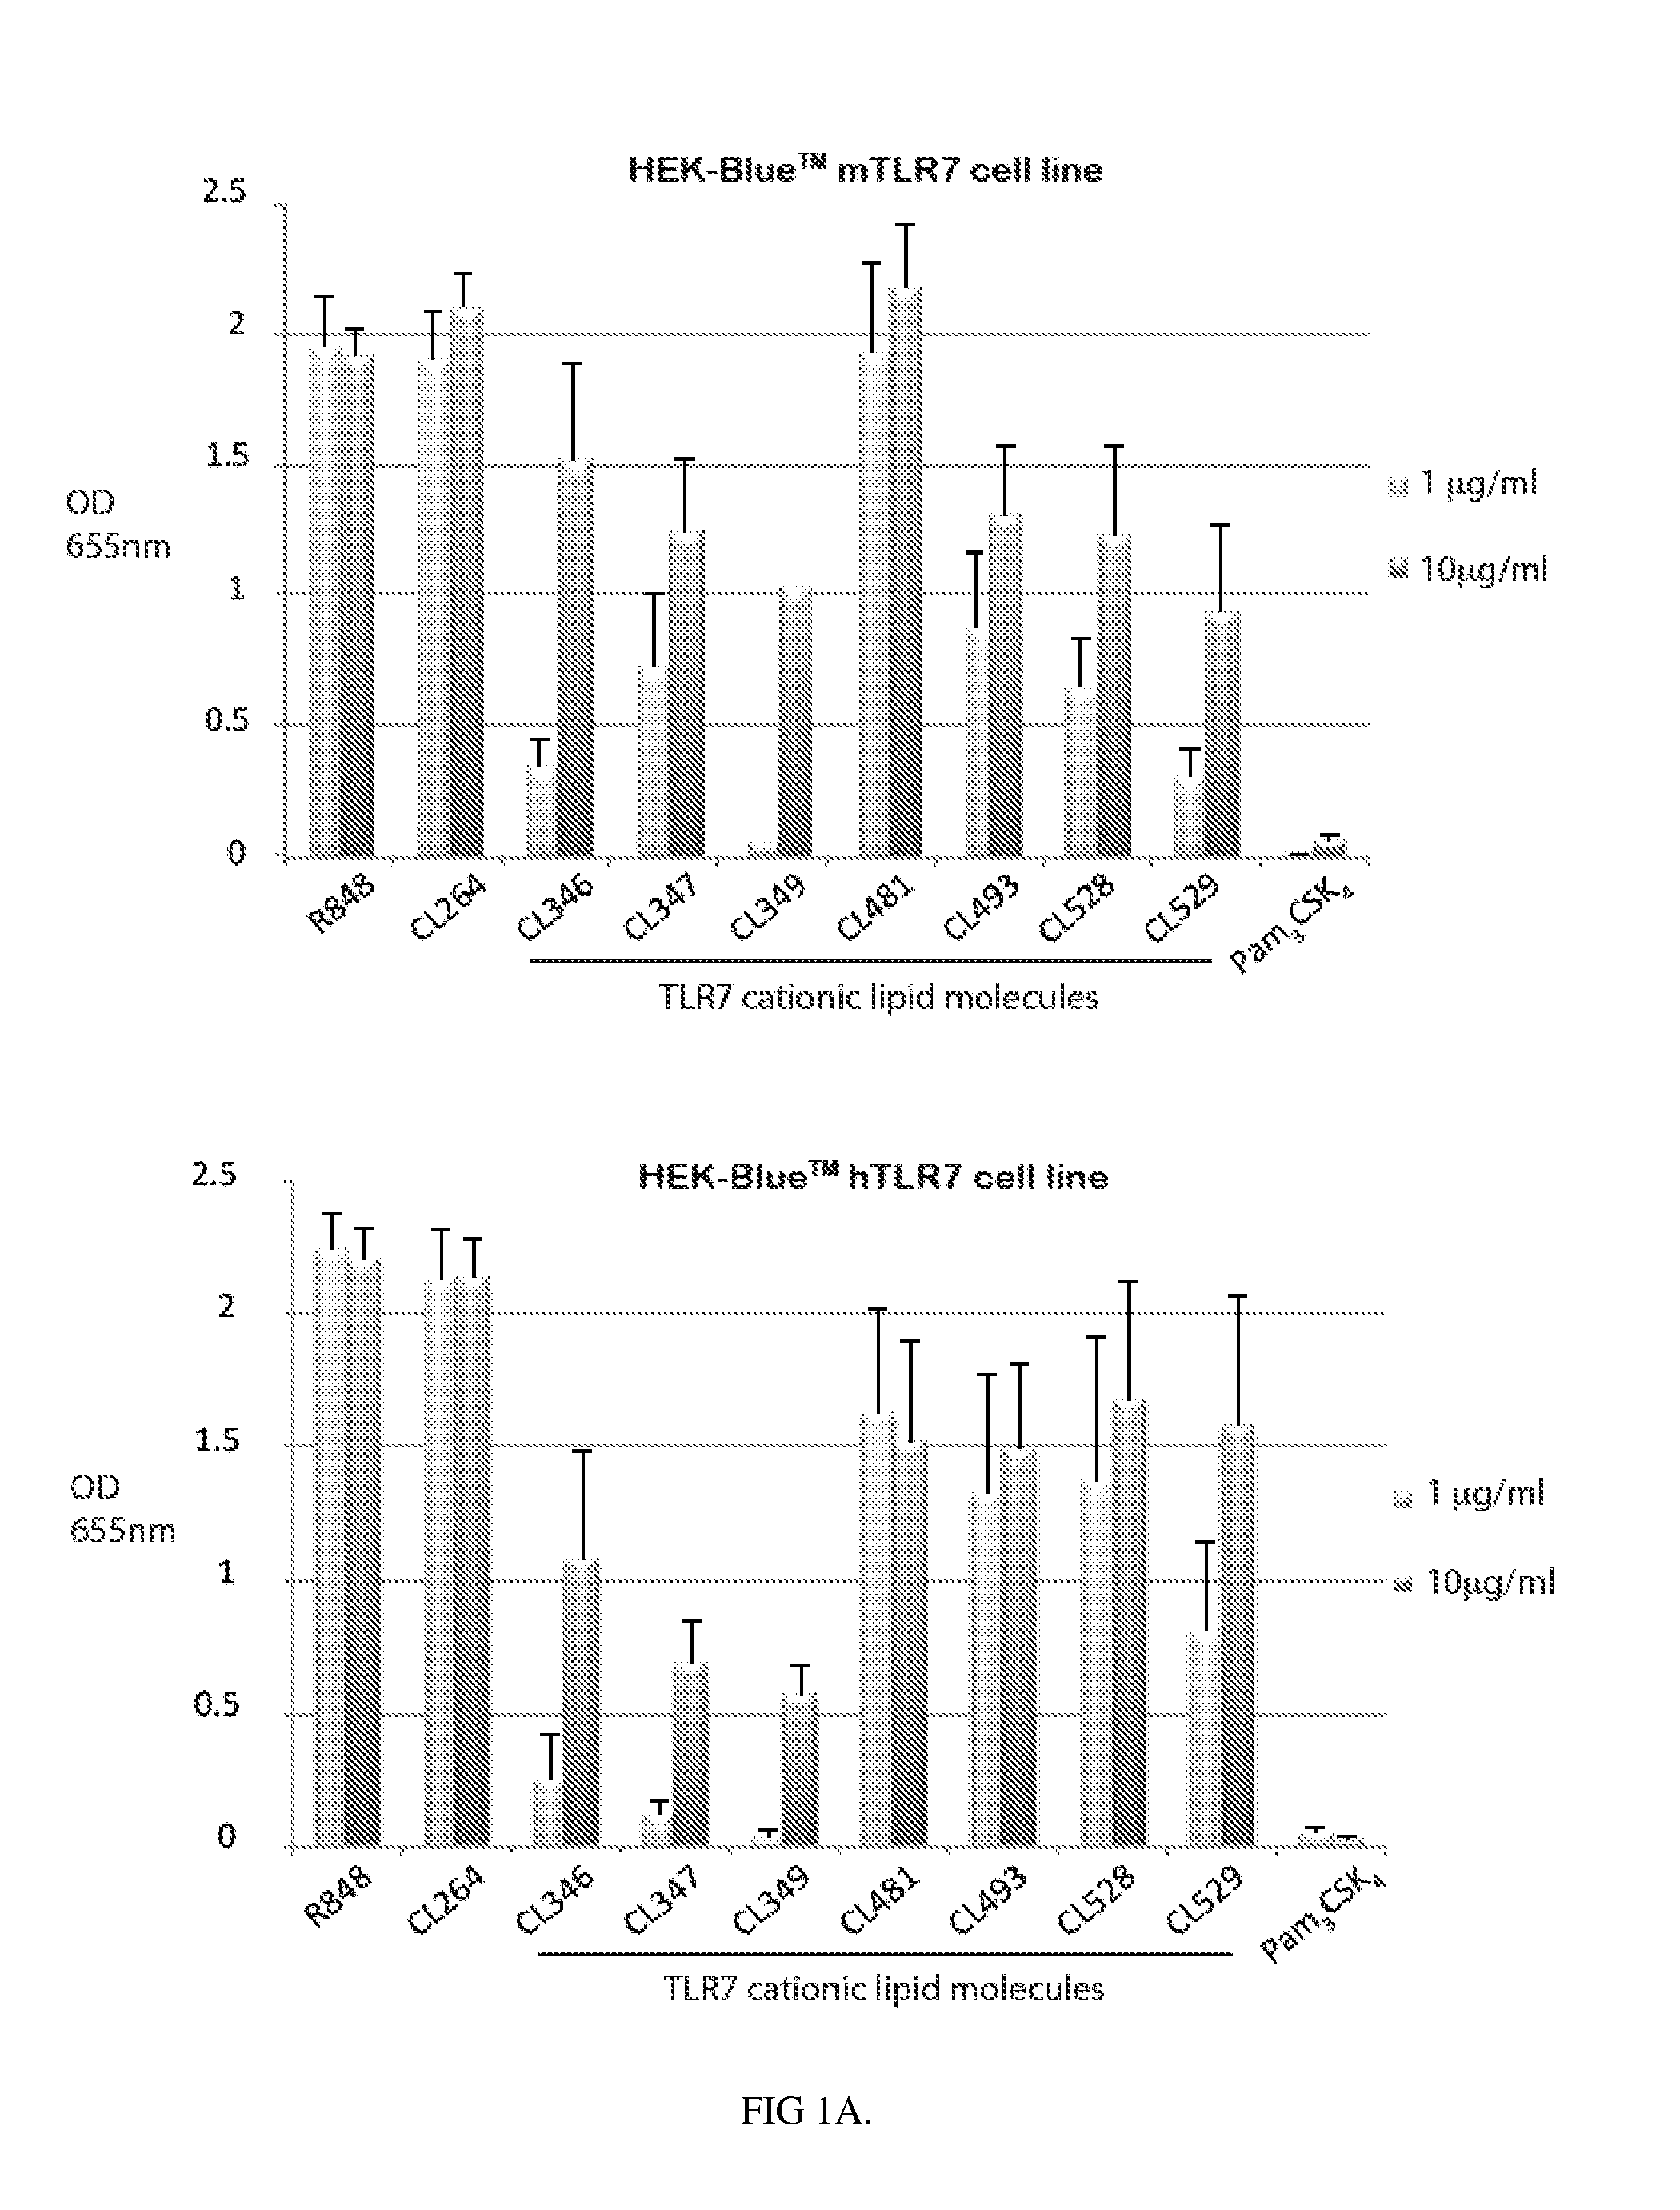 Novel compositions of tlr7 and/or tlr8 agonists conjugated to lipids